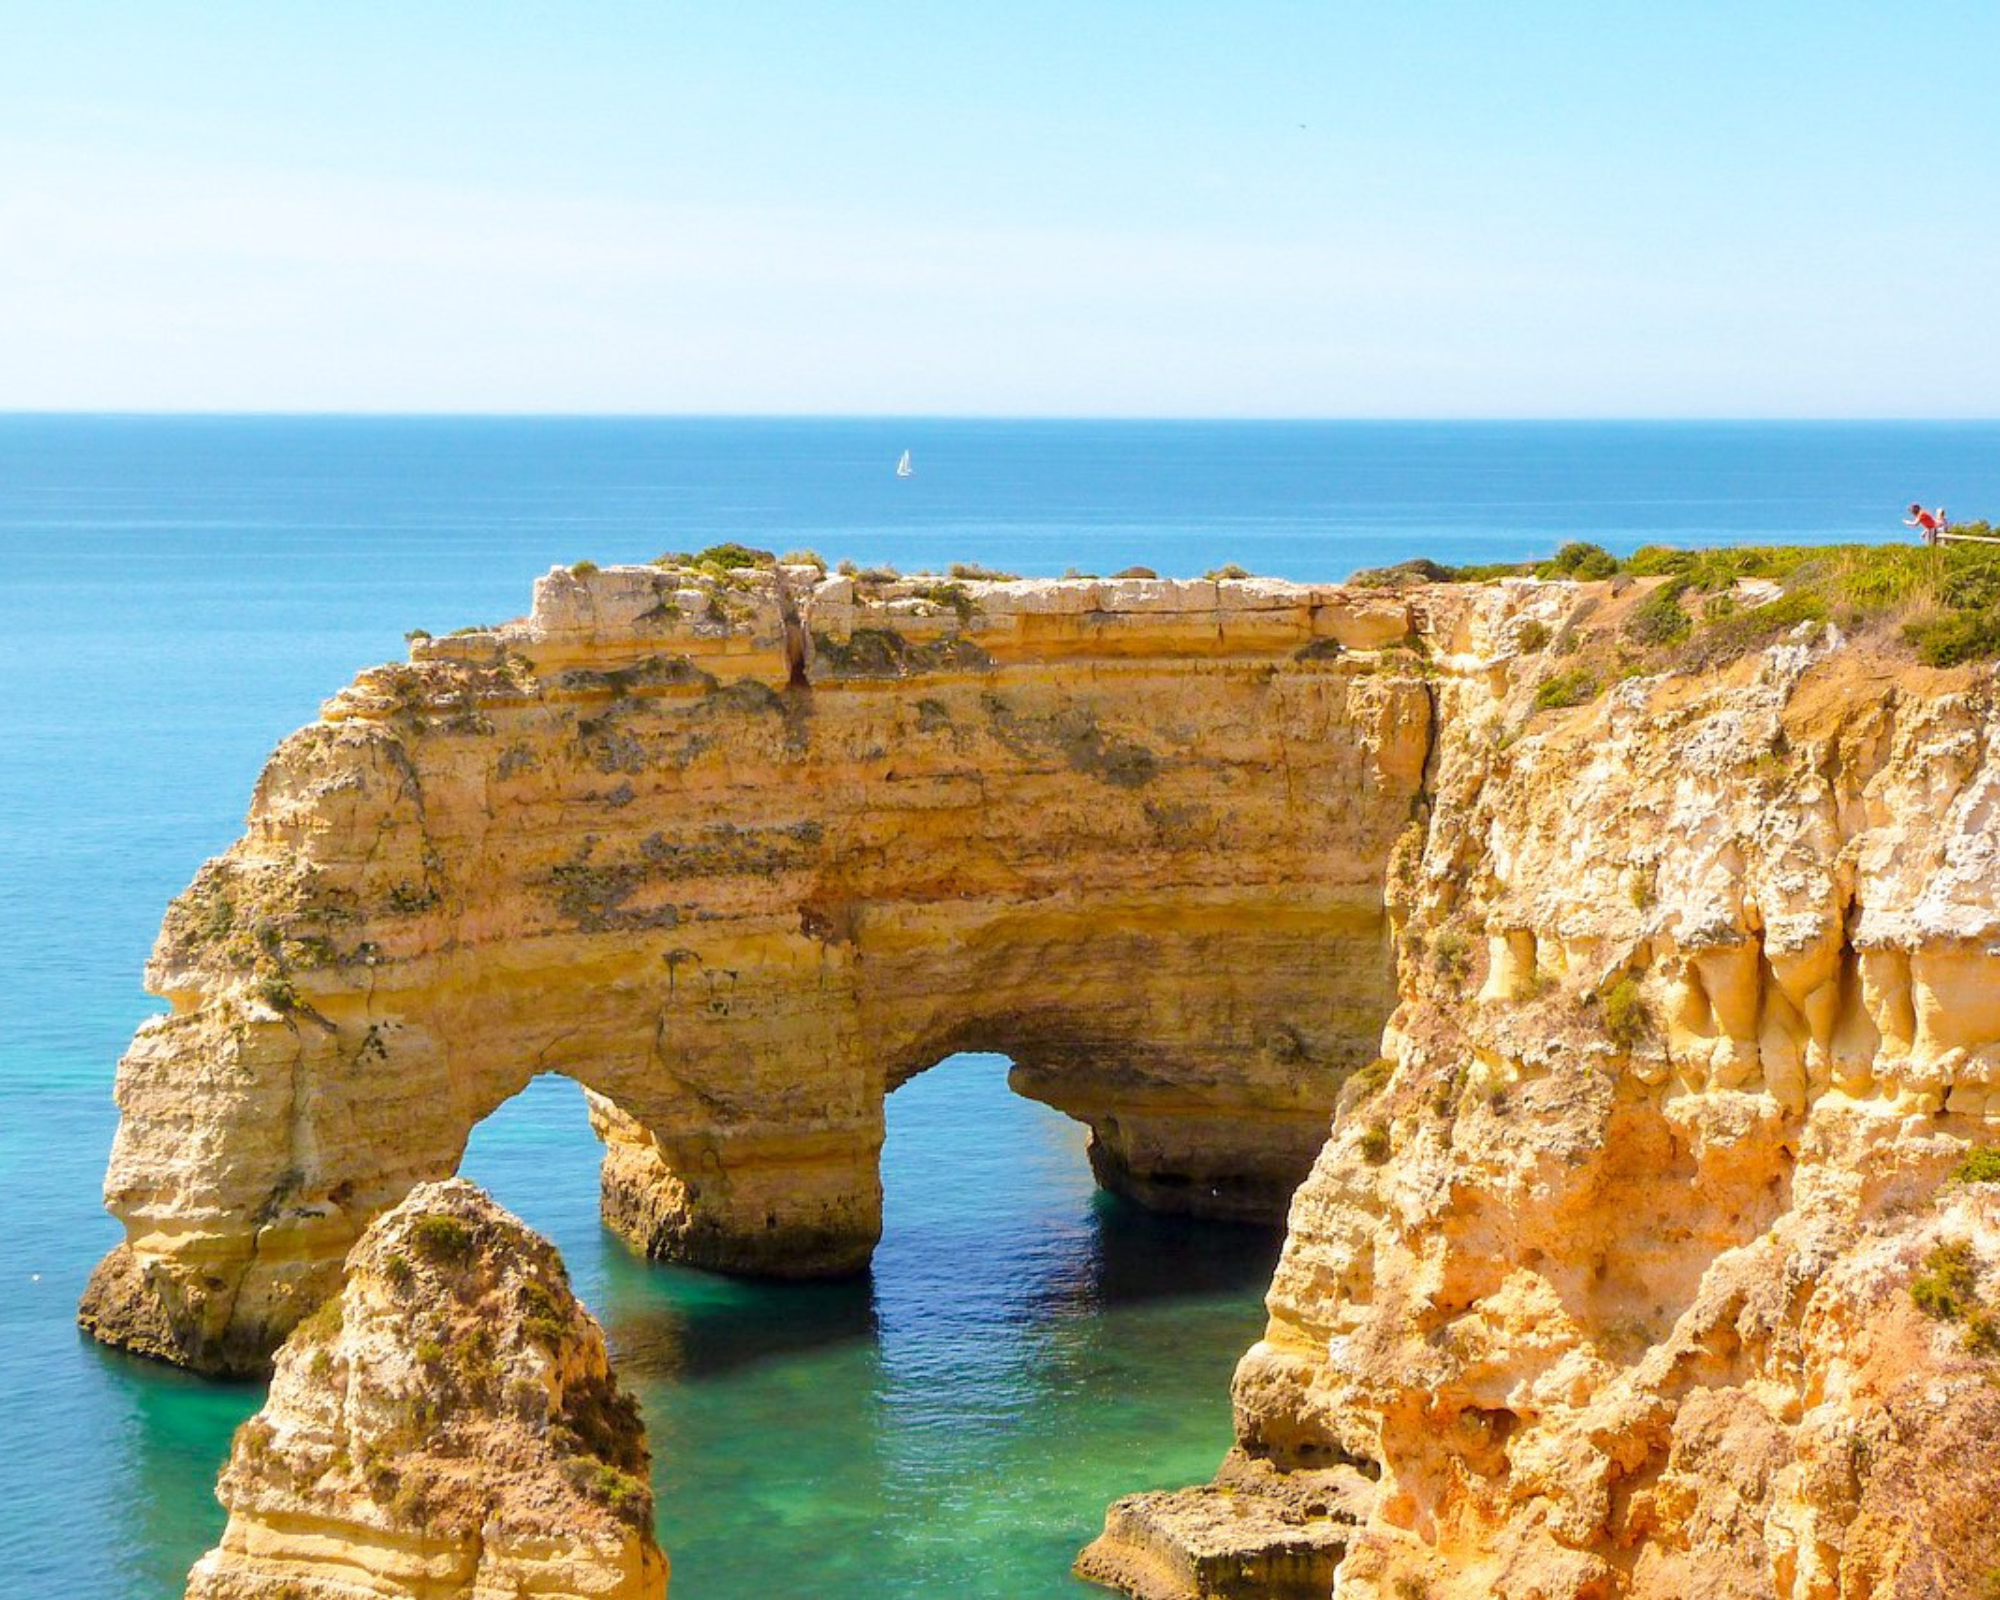 The 7 Wonderful Beaches of Portugal by Luz Editions